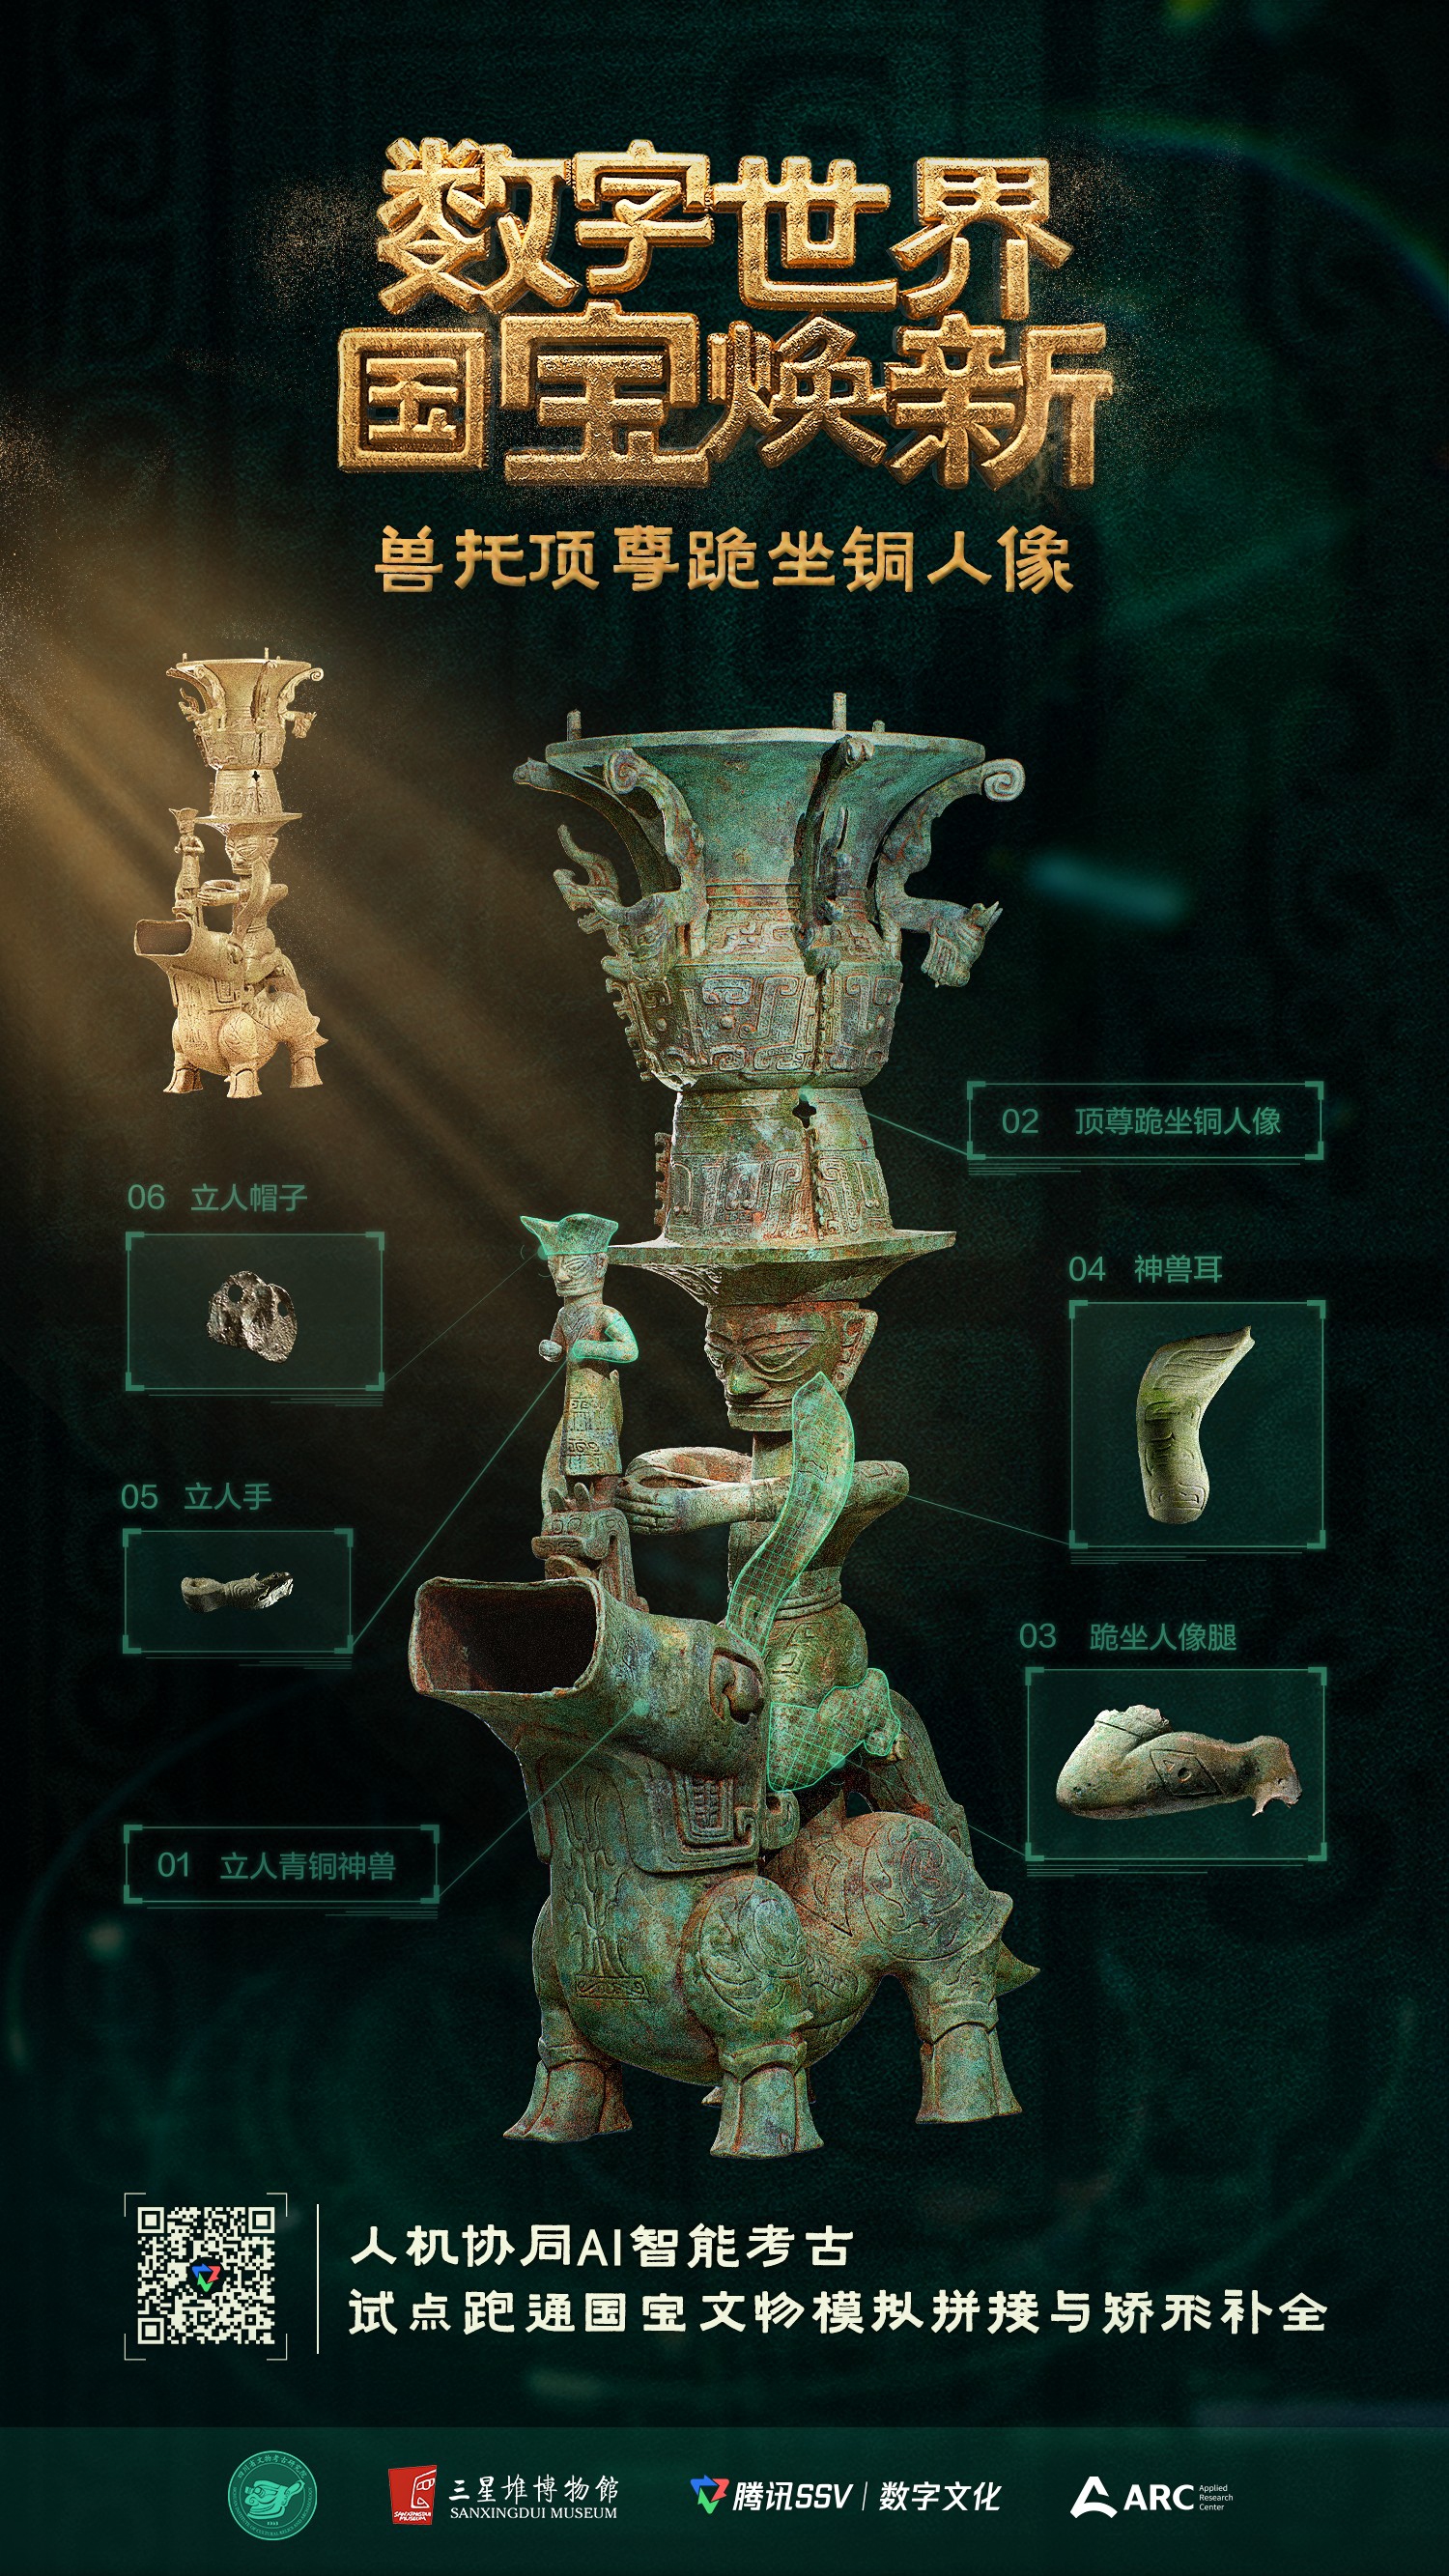 Photo: Courtesy of the Sichuan Provincial Cultural Relics and Archaeology Research Institute
